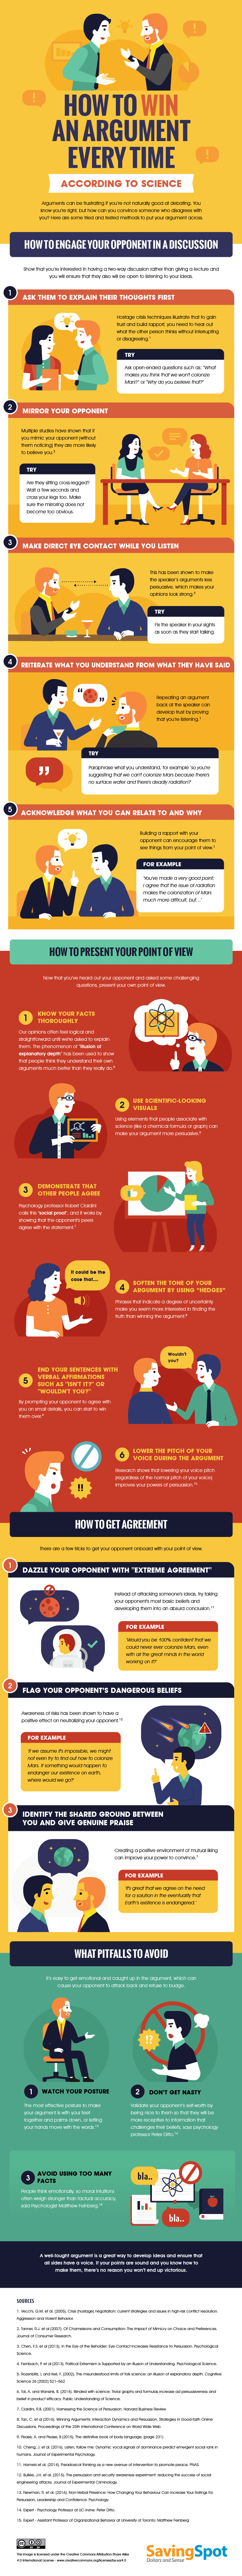 How to Win an Argument Every Time (According to Science) #infographic